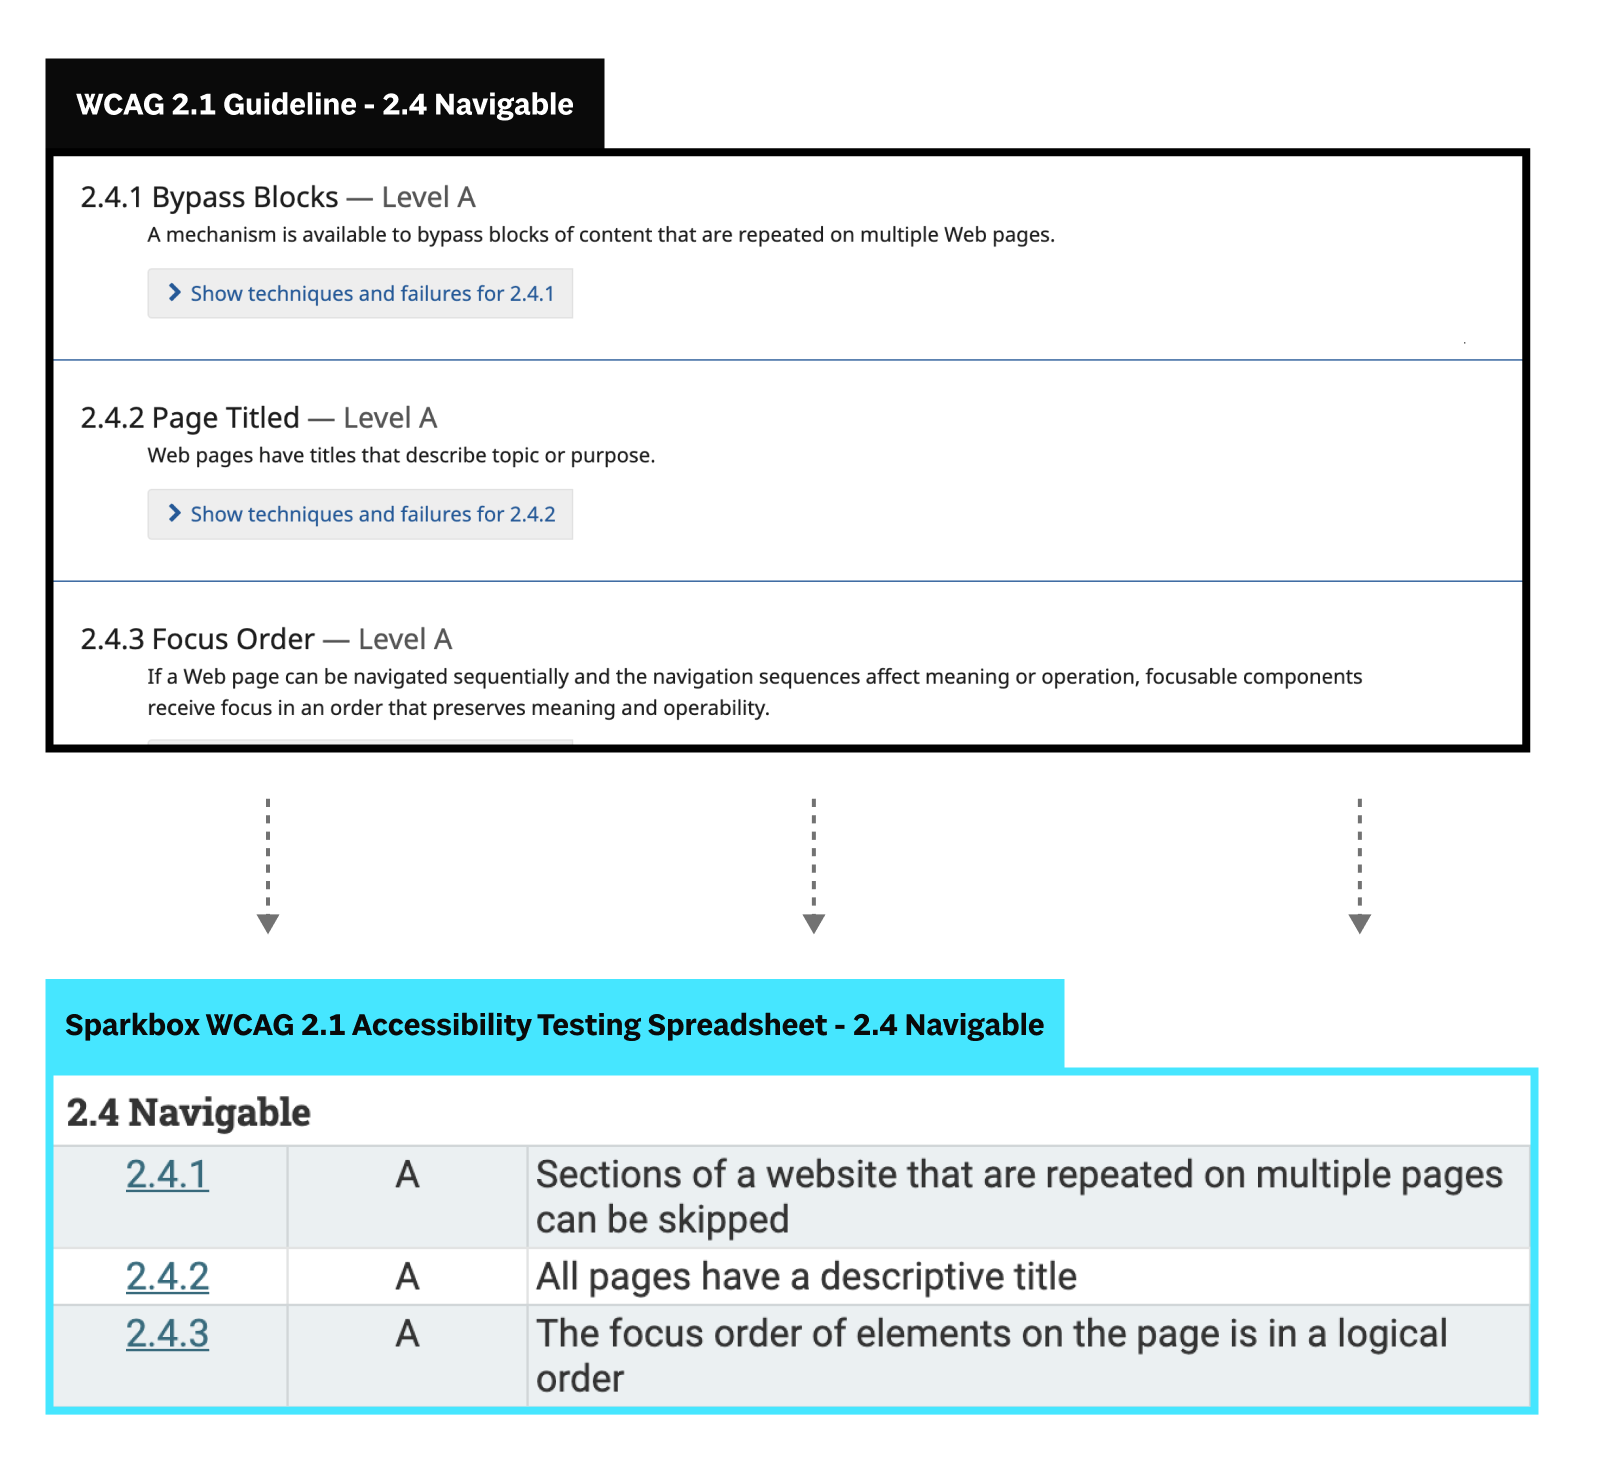 WCAG's Guideline 2.4 Navigable on the top showing the first three criteria. On the bottom, the checklist listing out the same three criteria.